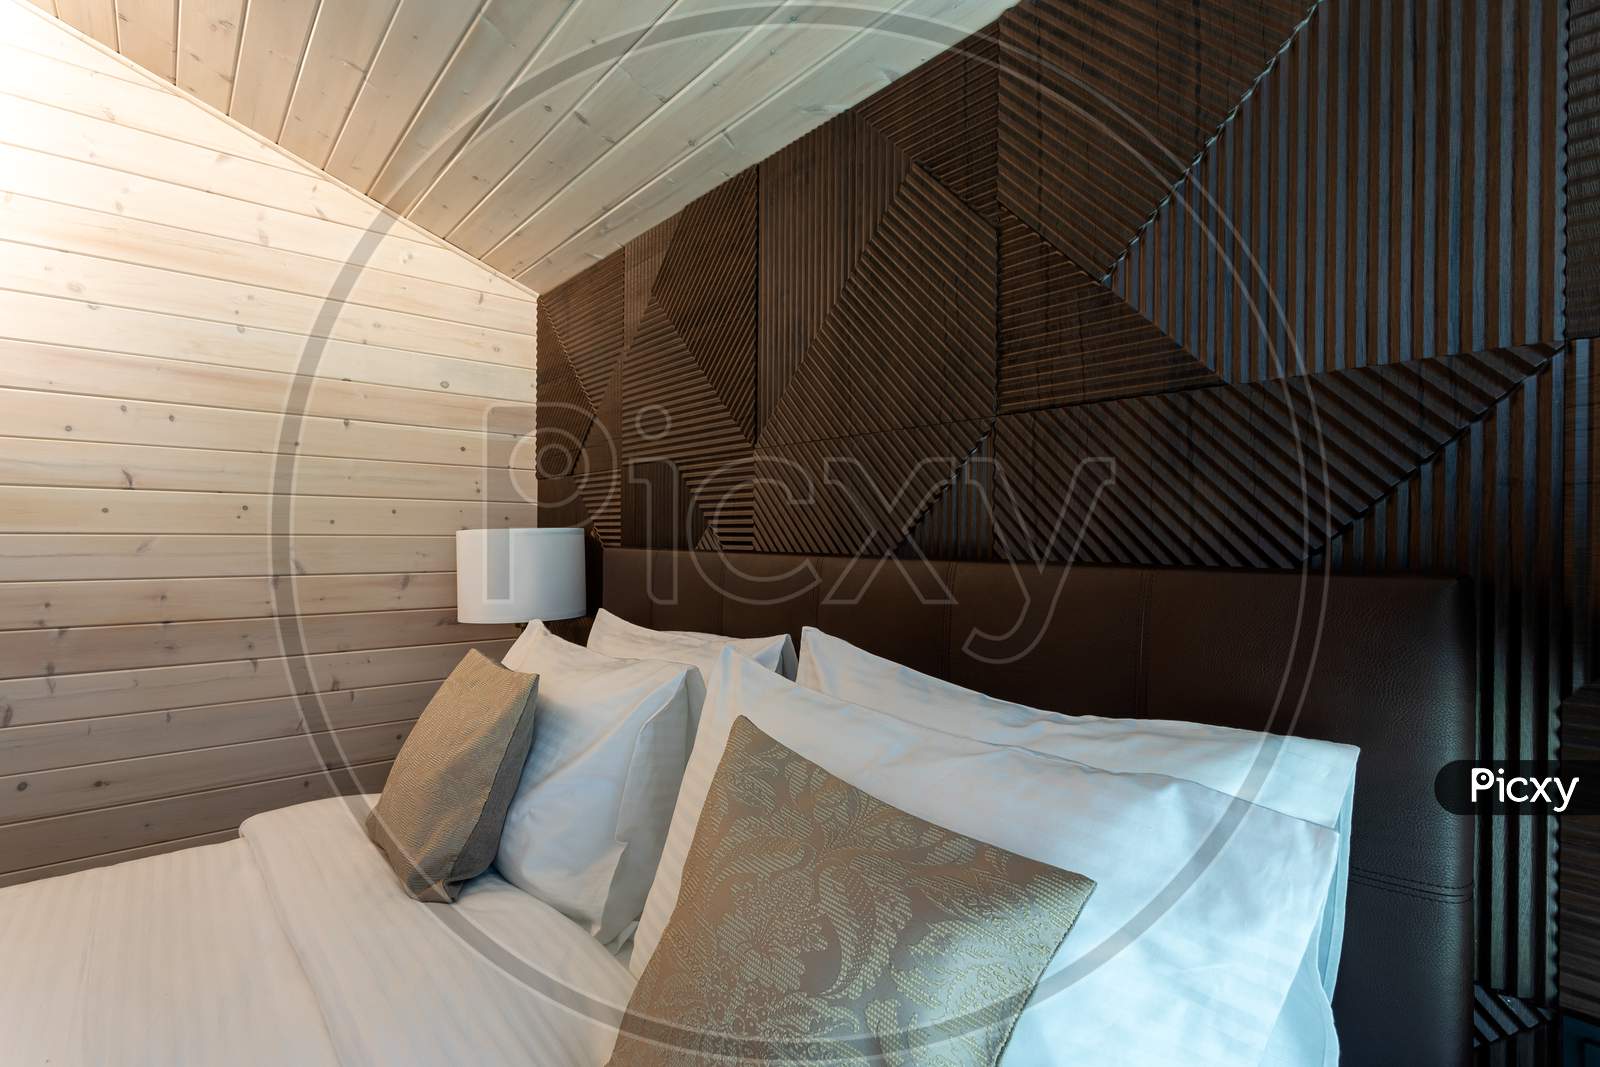 White Bed,  Quilt And Pillows In  Wooden Bedroom.  Hotel Bedroom.  Comfortable Bed With Soft Blanket In Stylish Room